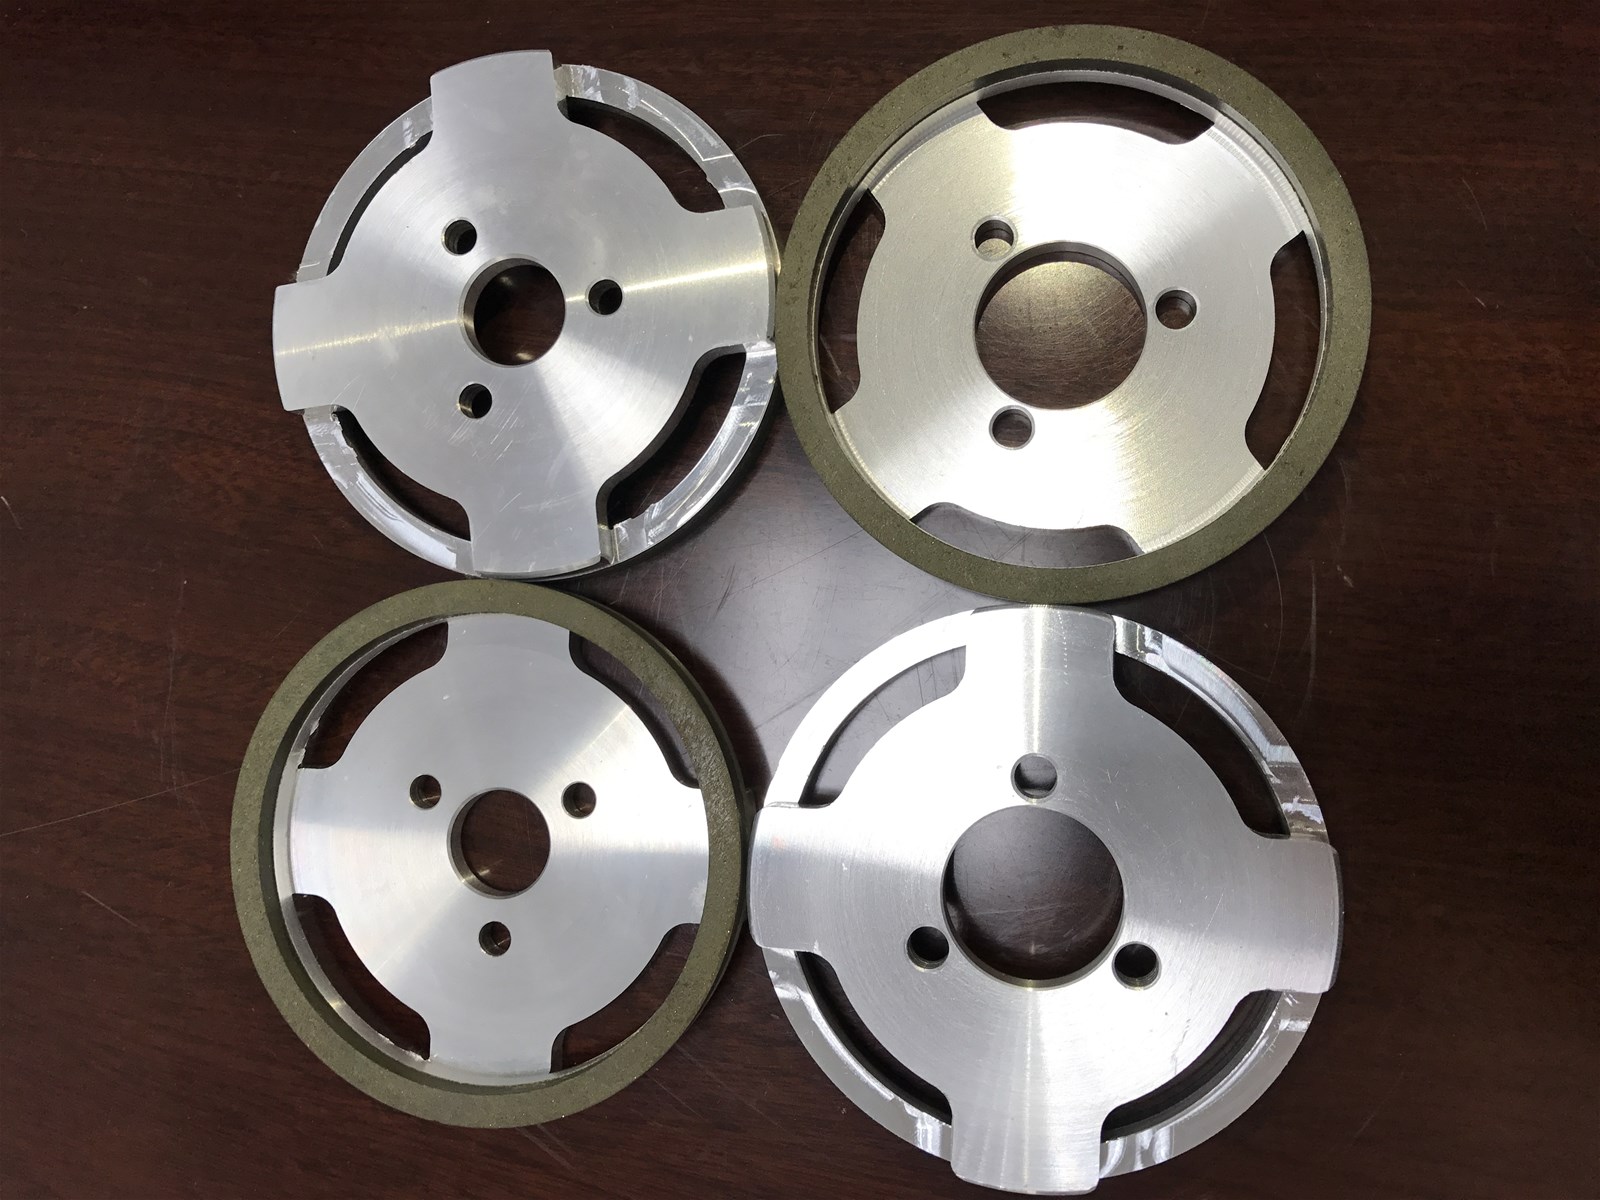 Grinding wheel for grinding knives and blades